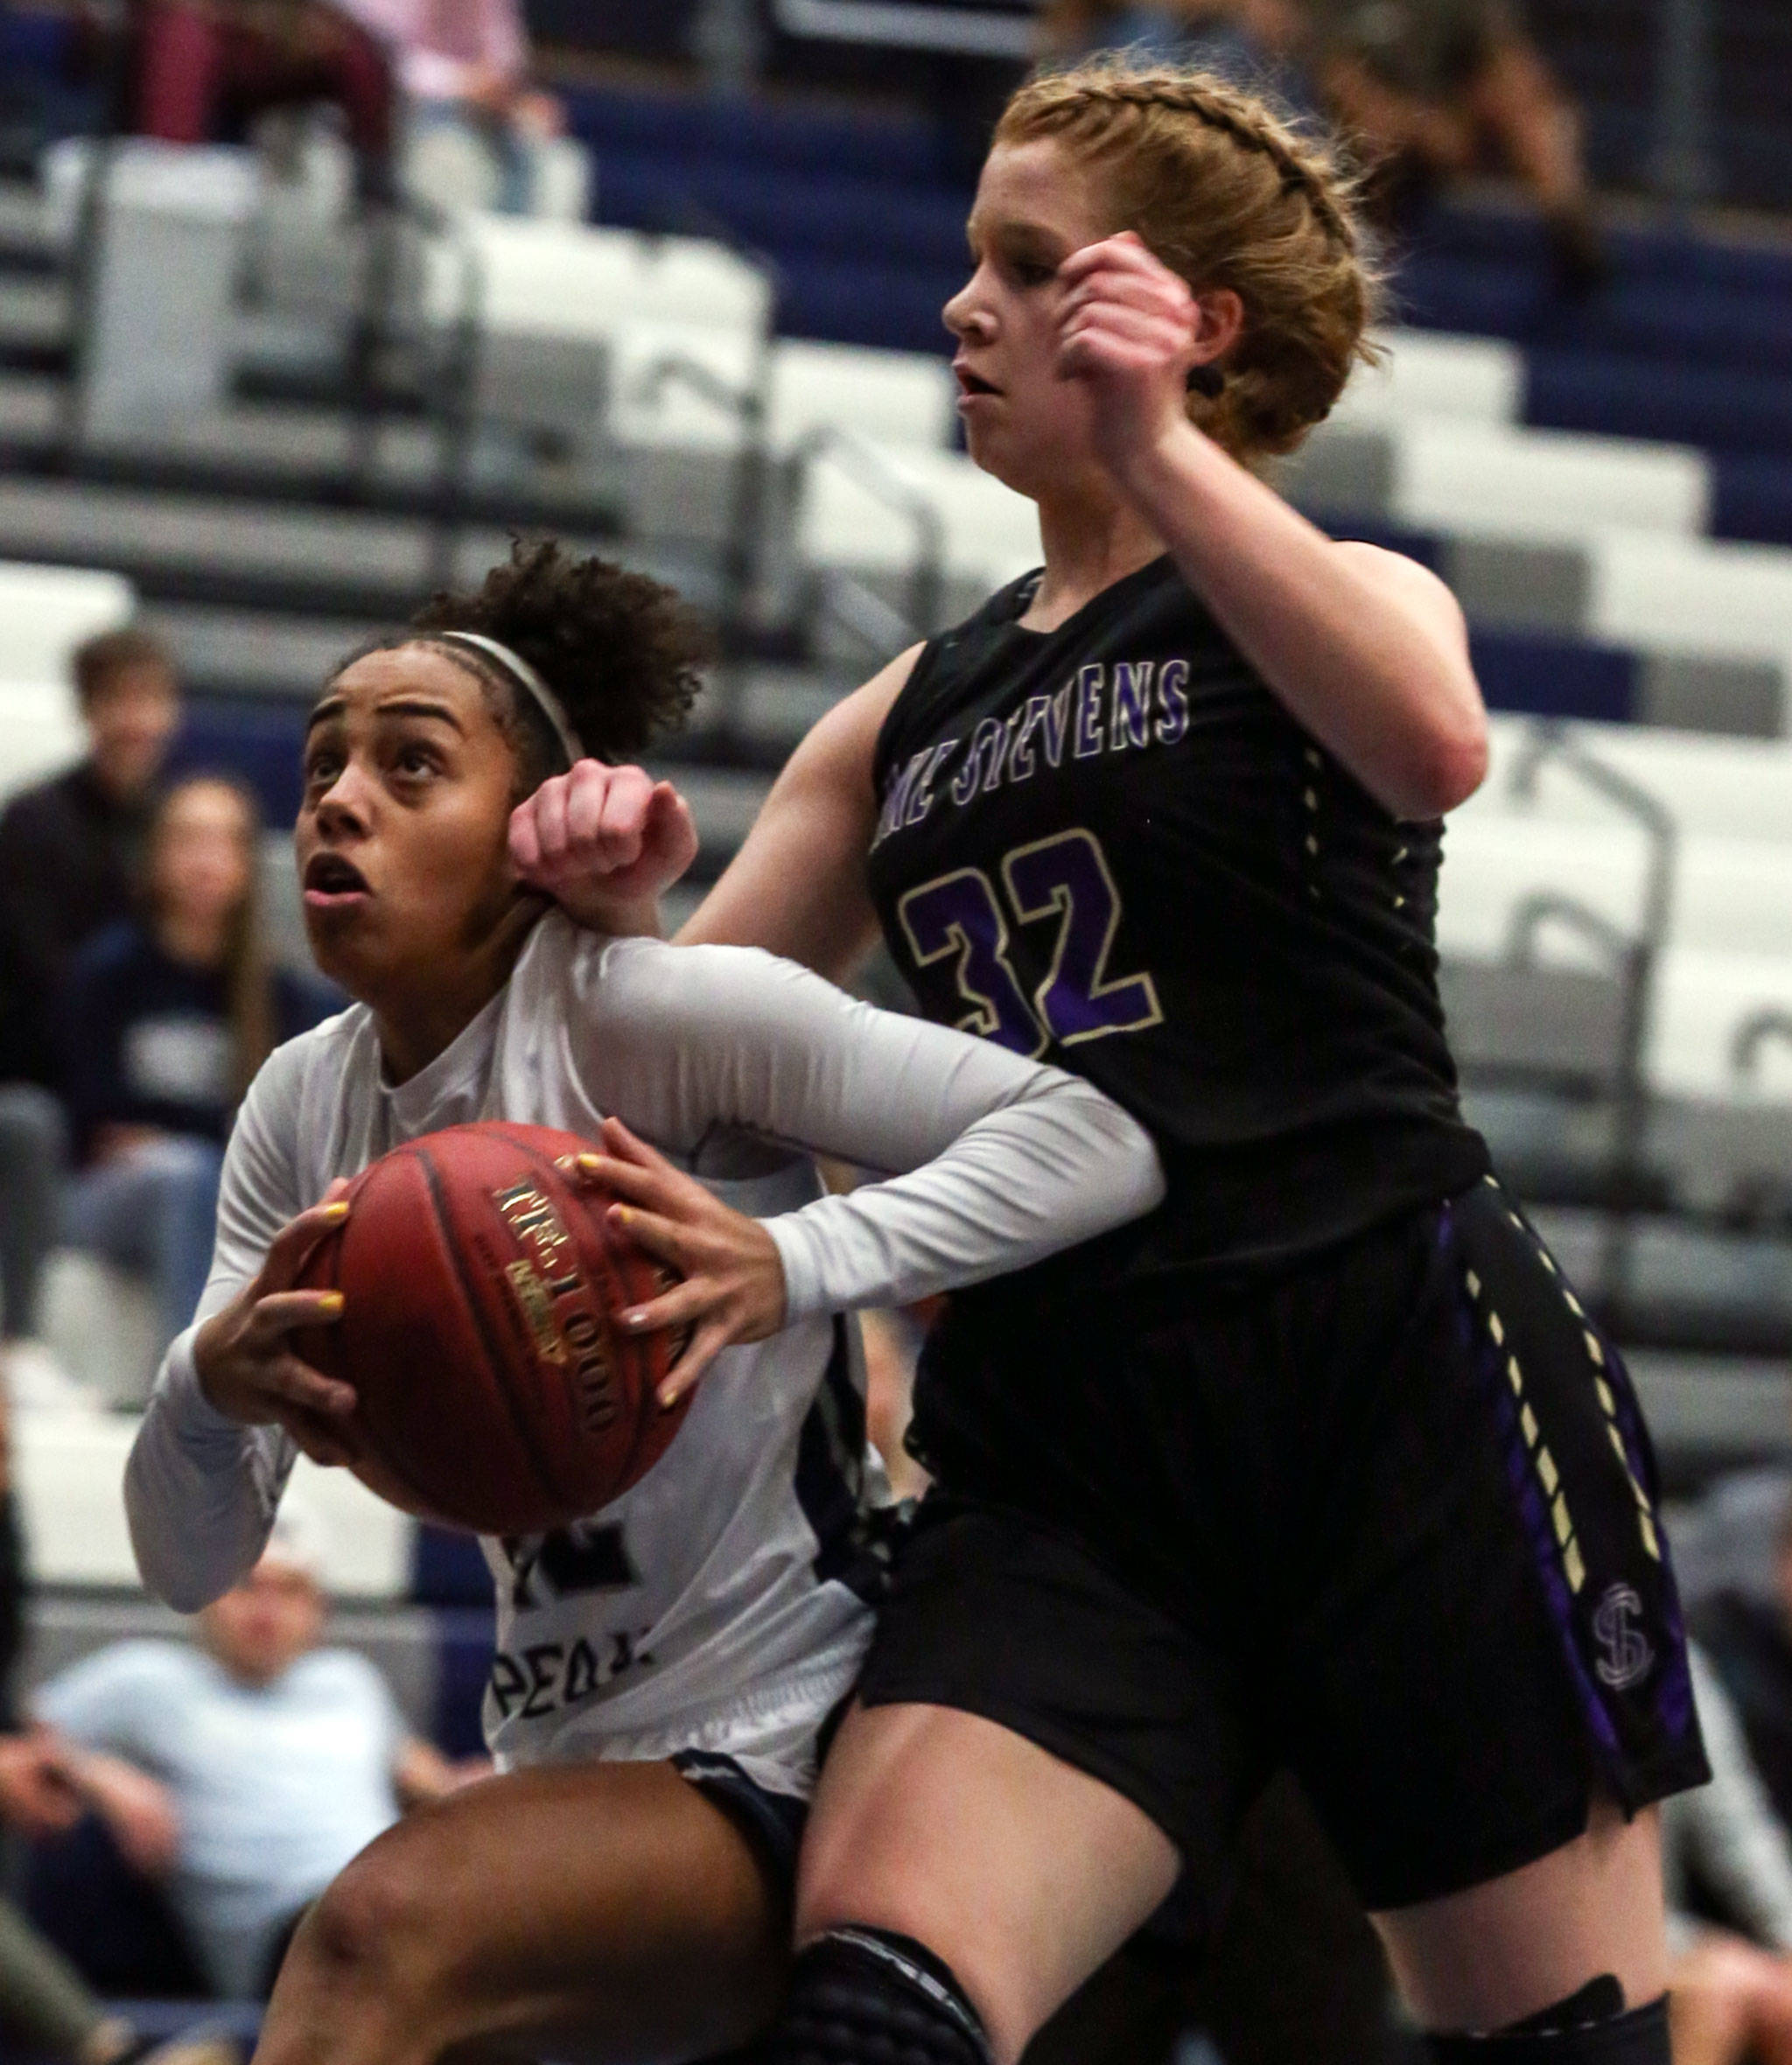 Glacier Peak’s Aaliyah Collins attempts a shot with Lake Stevens’ Cori Wilcox trailing Tuesday night at Glacier Peak High School in Snohomish on December 18, 2019. Glacier Peak won 68-50. (Kevin Clark / The Herald)